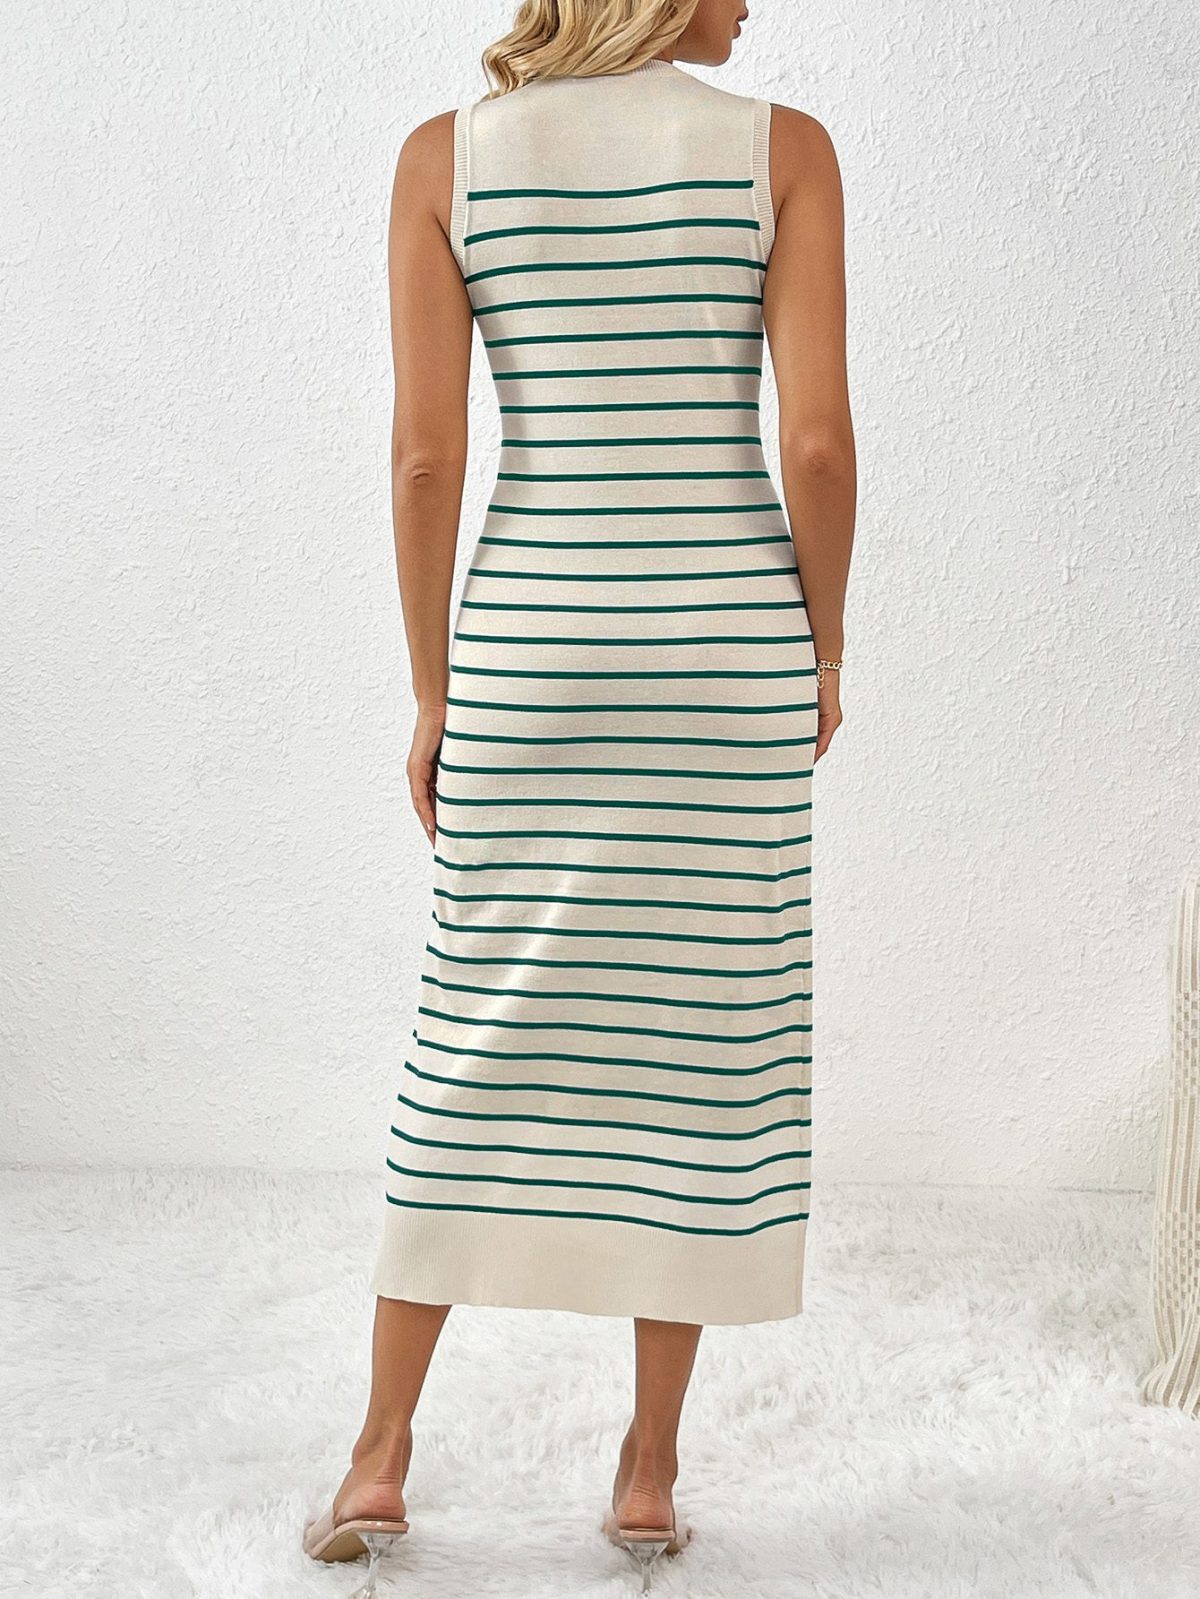 Sleeveless Splicing Pullover Striped Dress in Dresses